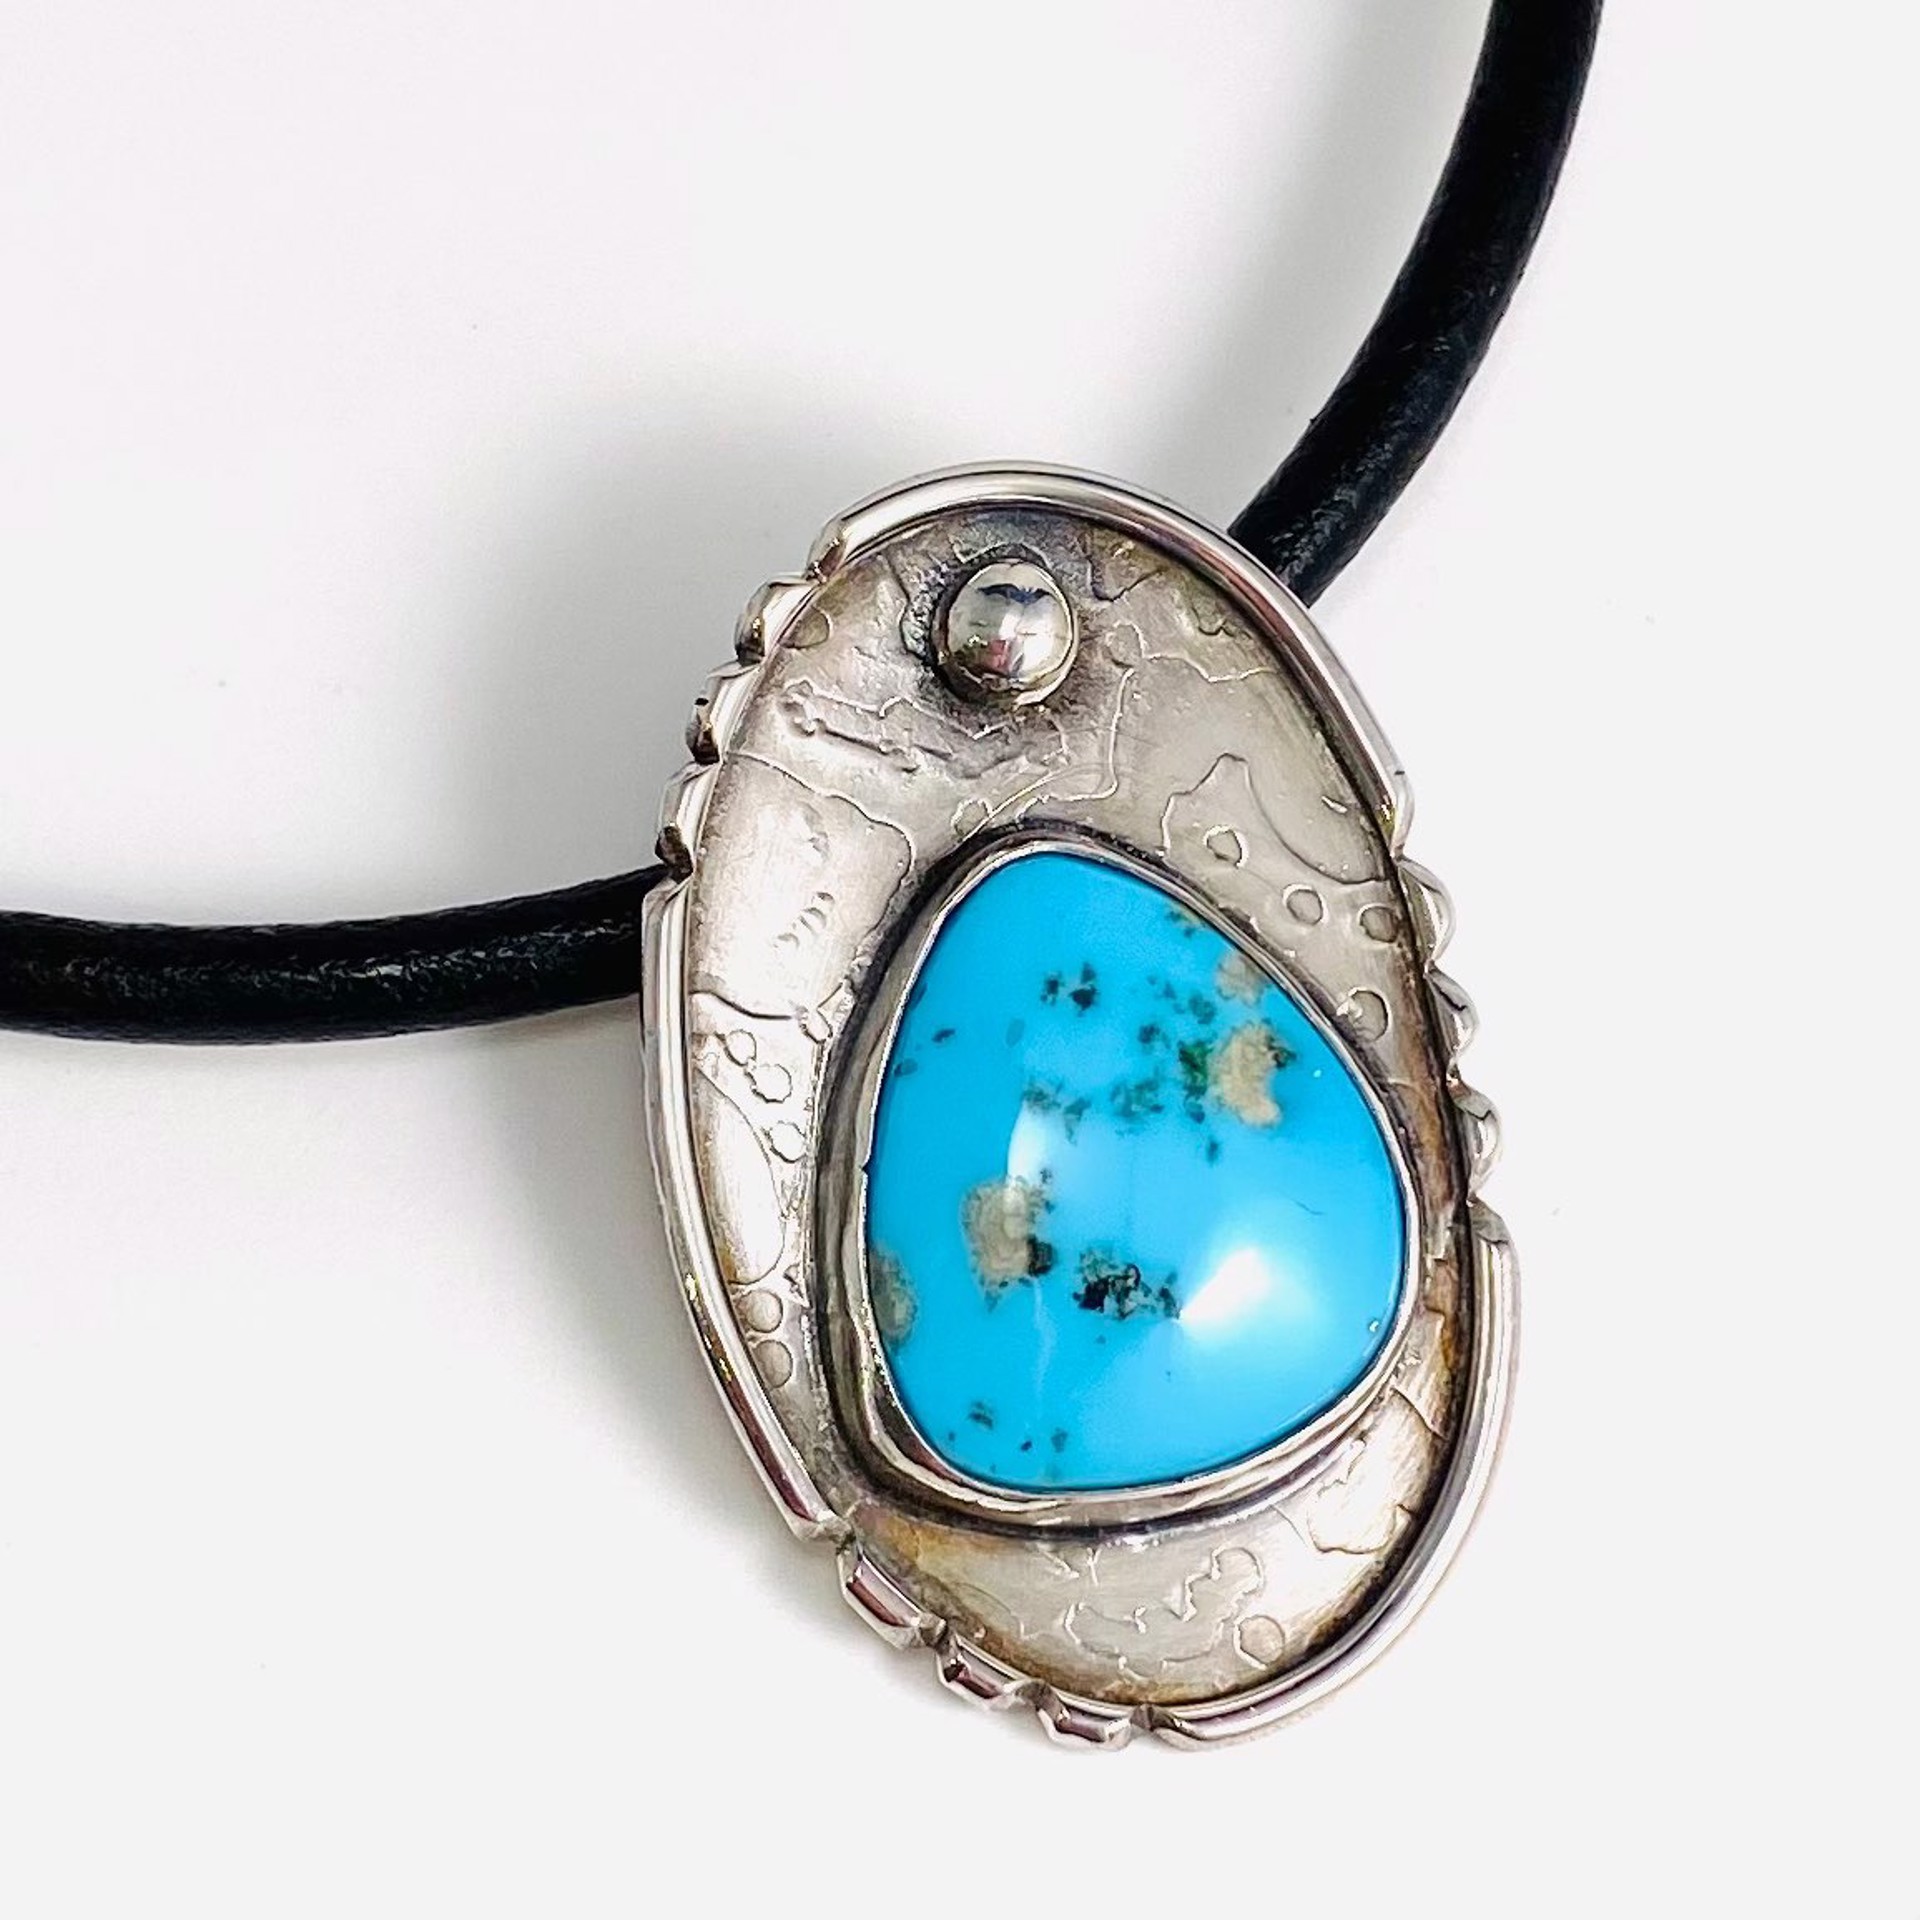 Kingman Turquoise and Sterling Pendant on Black Leather Necklace AB21-41 by Anne Bivens